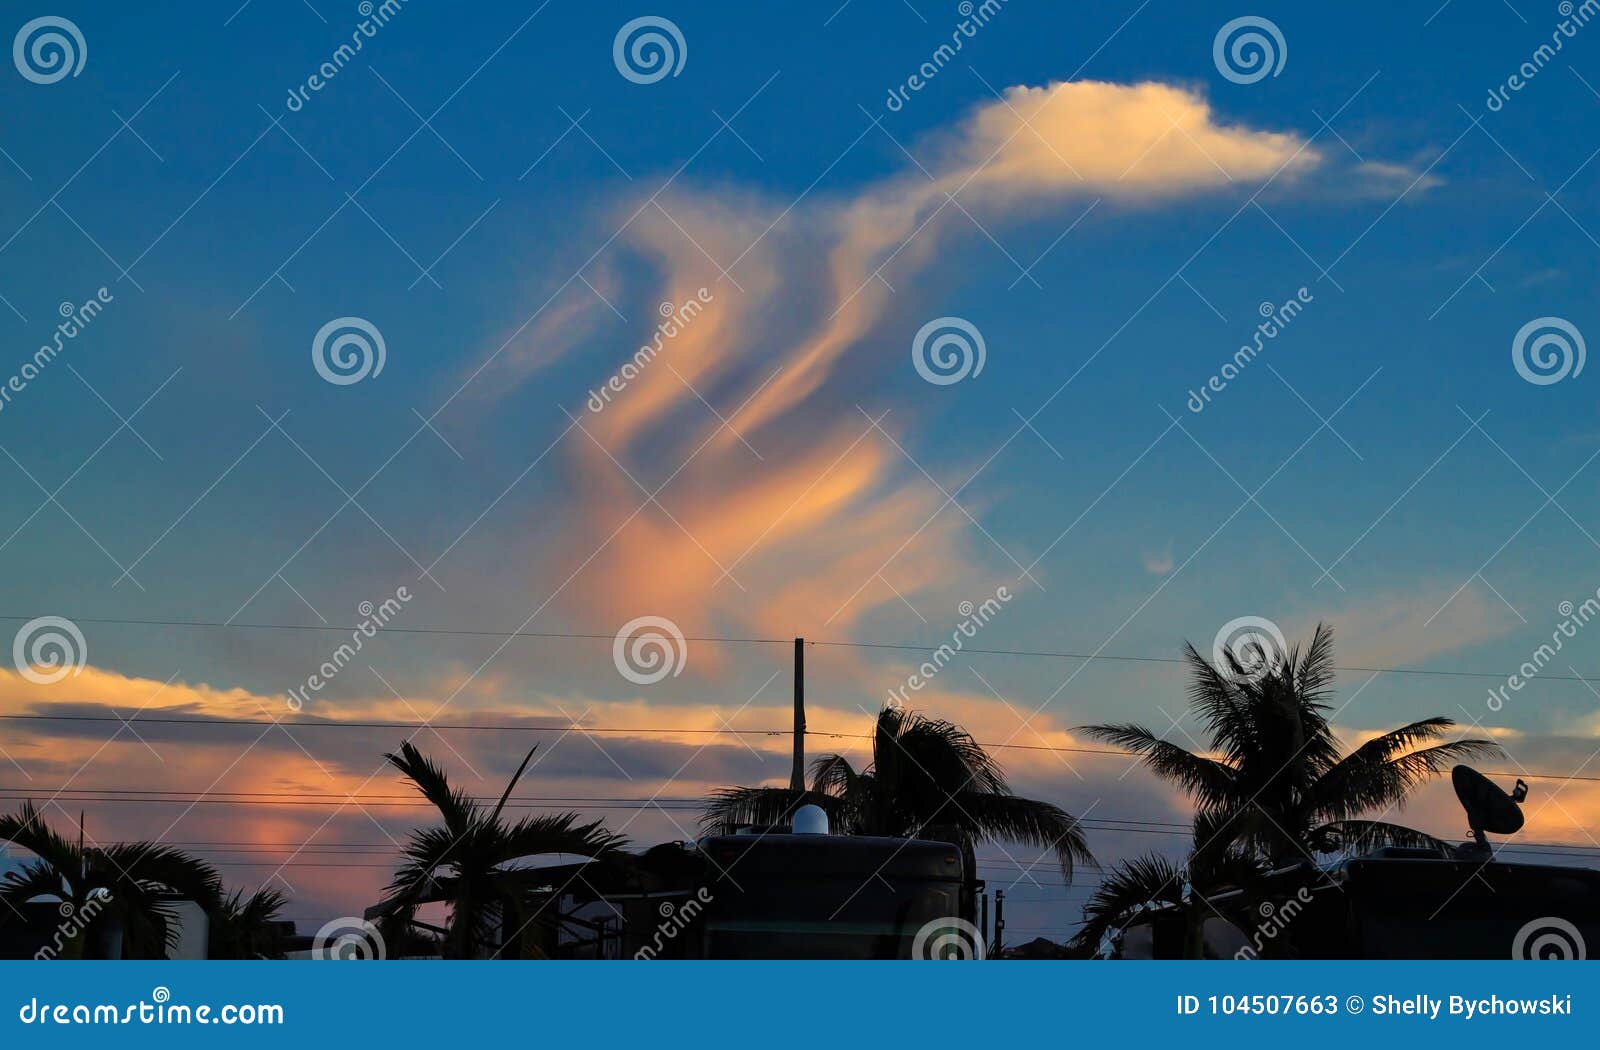 clouds form funny  like a duck? in sunset sky over rv park in marathon key.